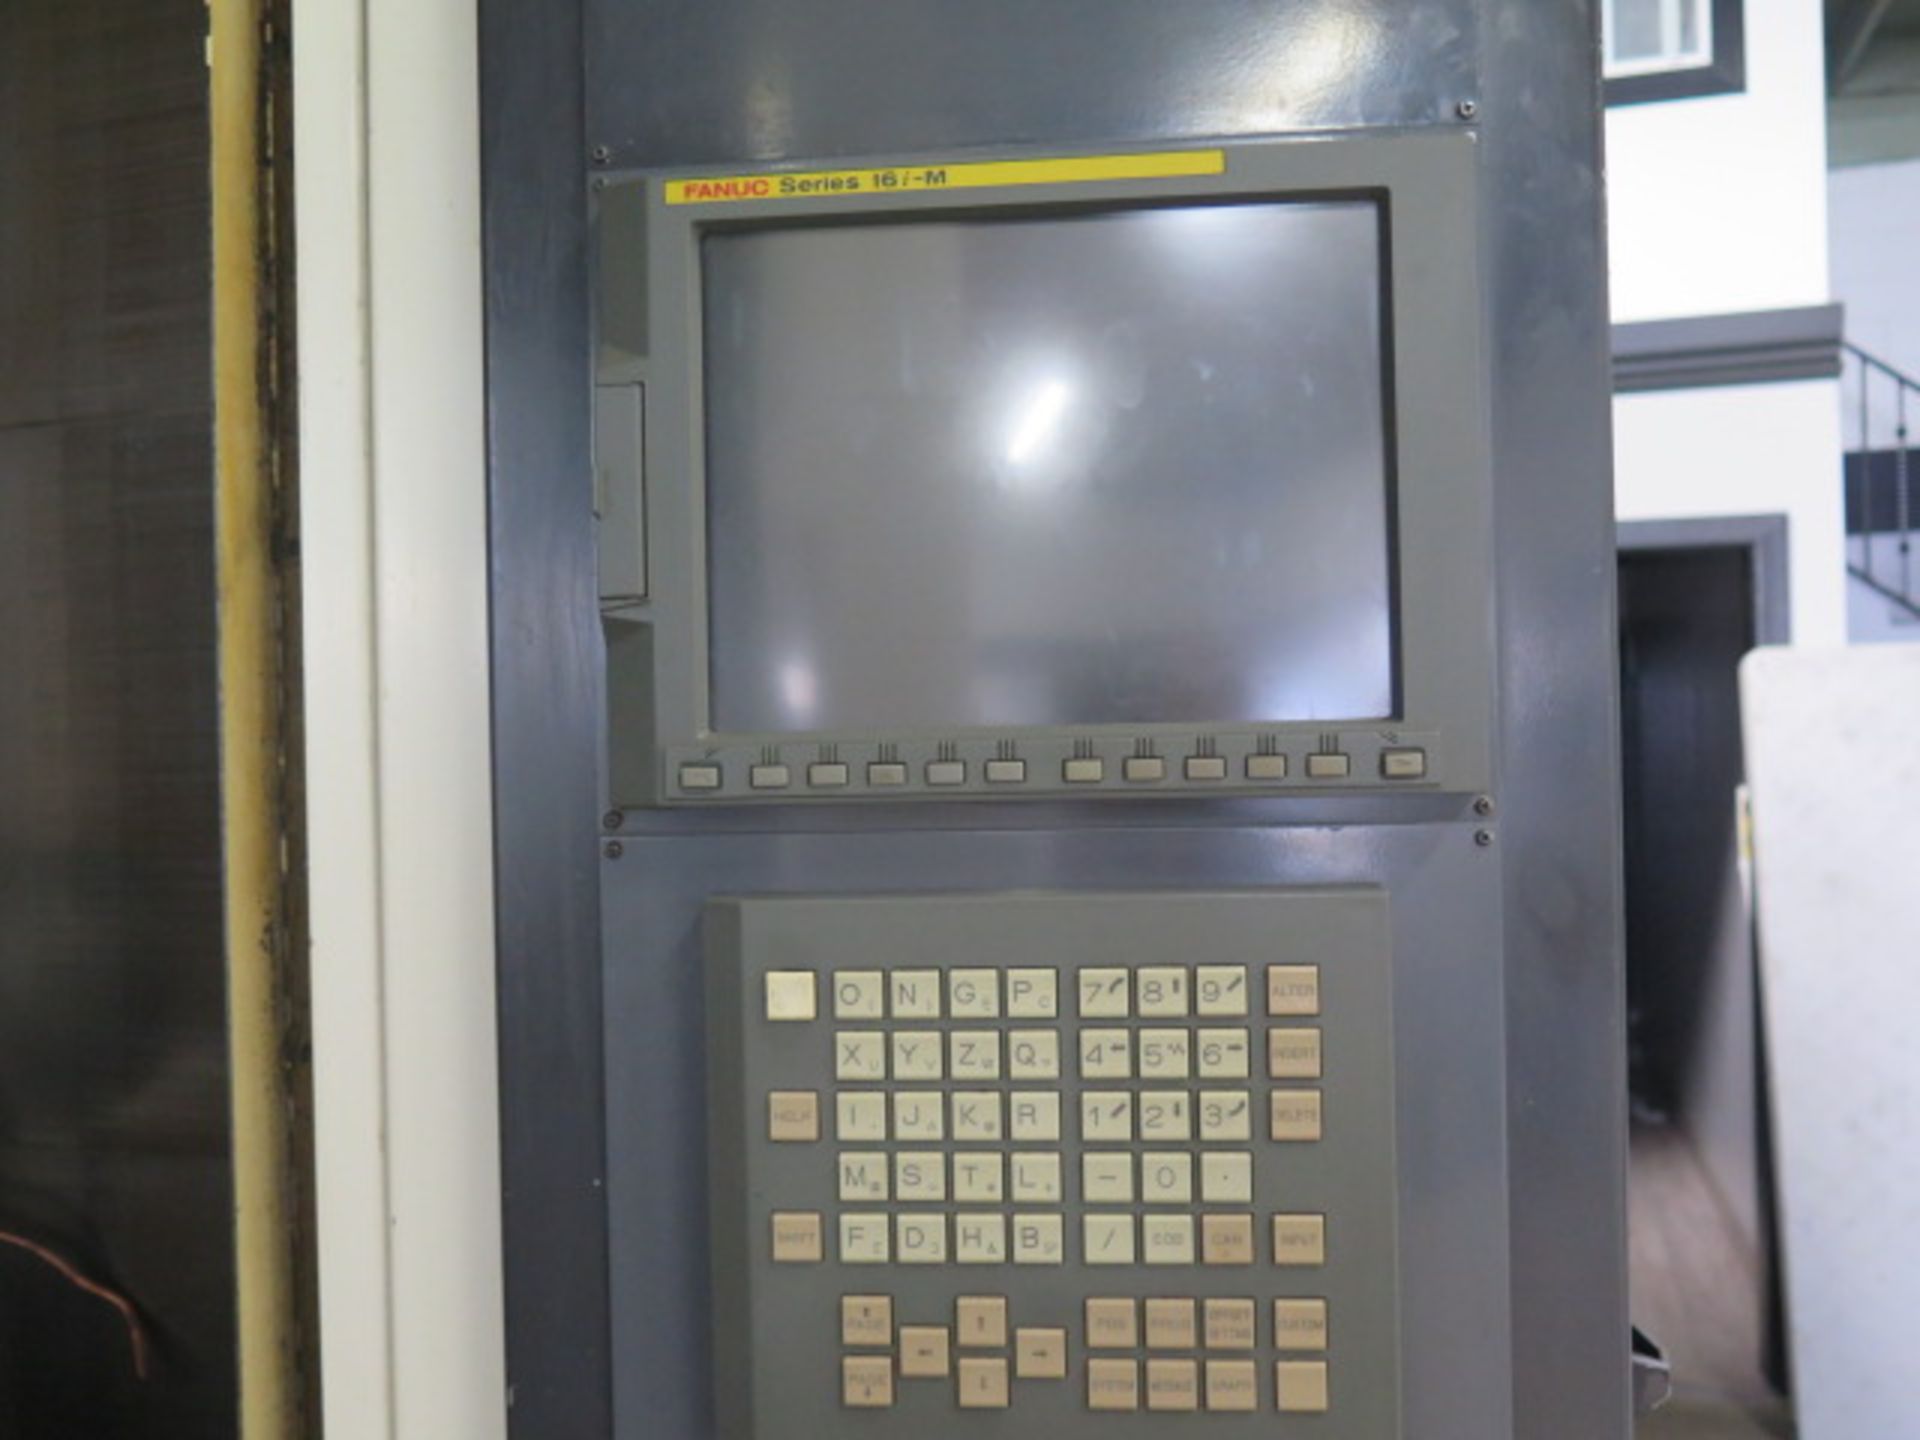 Nigata SPN66 2-Pallet 4-Axis CNC HMC s/n 46600095 w/ Fanuc 16i-M Controls, SOLD AS IS - Image 16 of 24